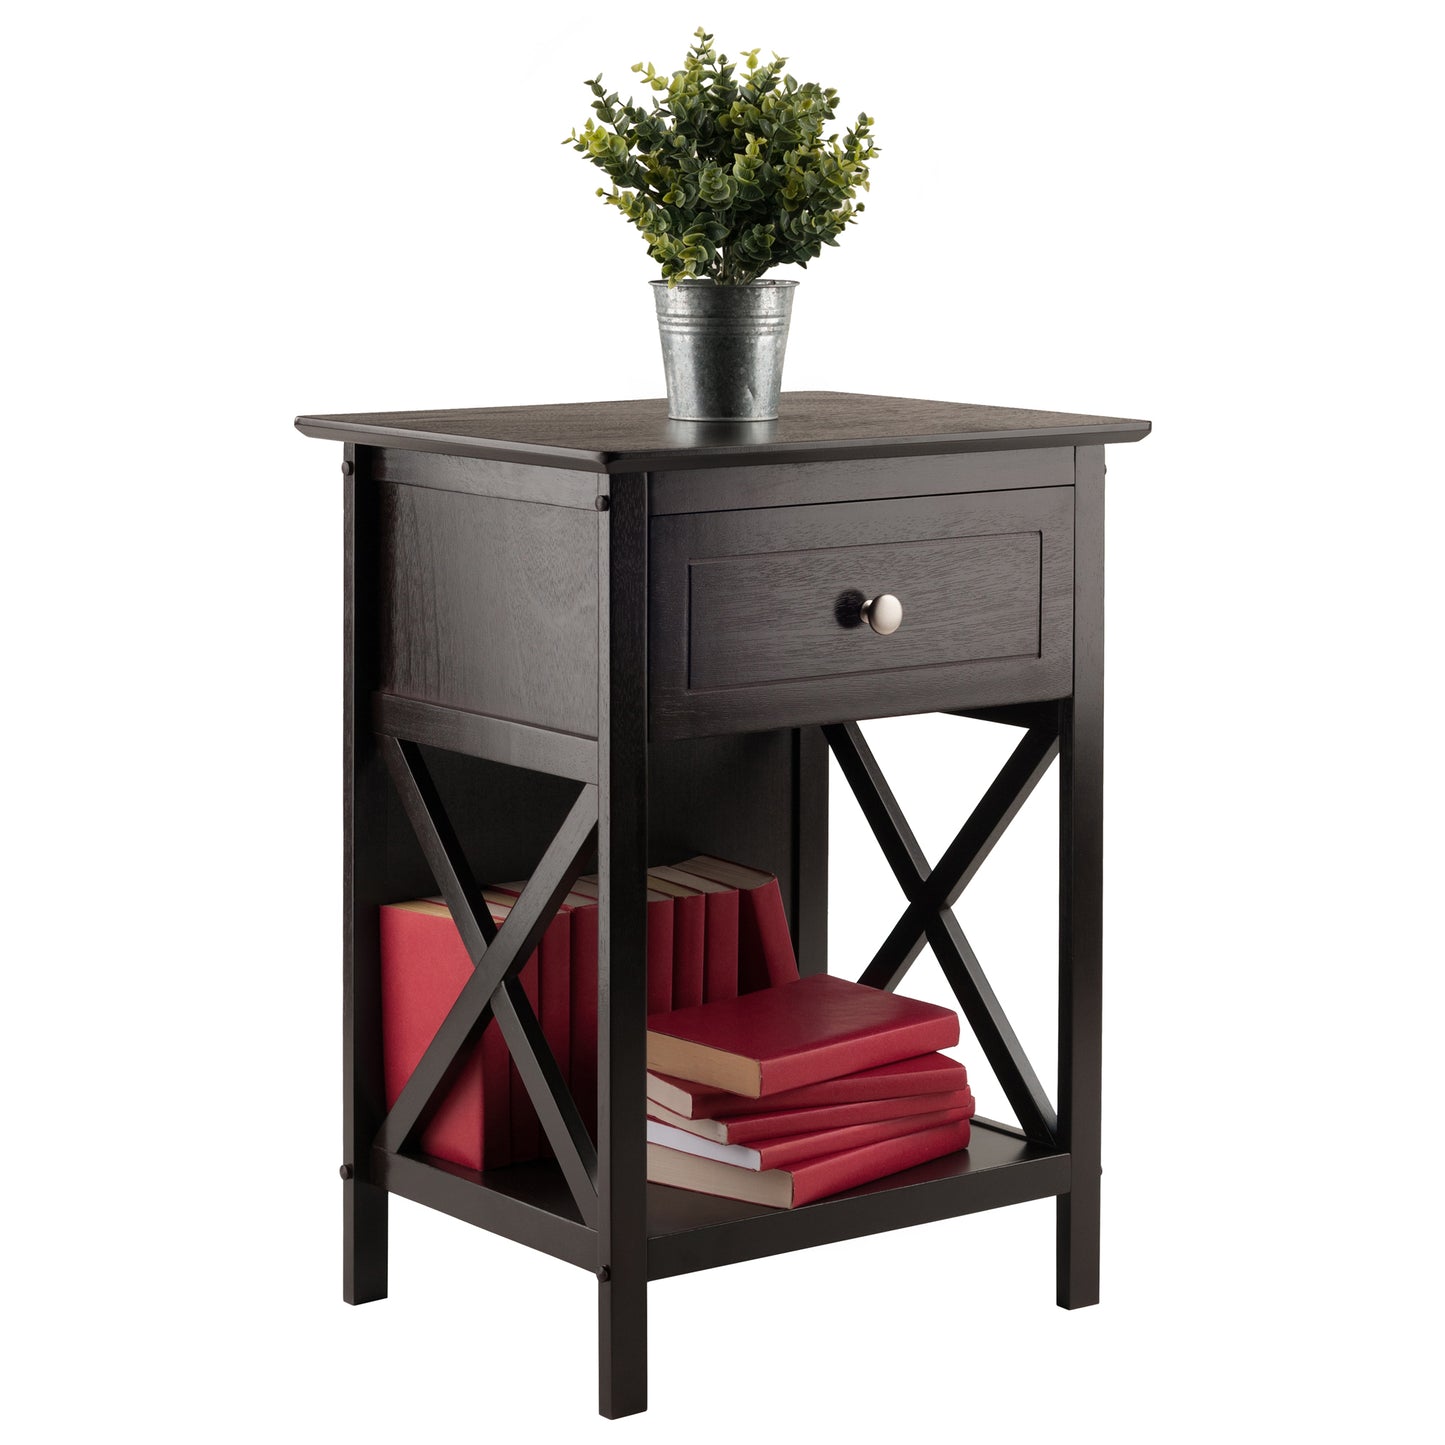 Xylia Accent Table, Nightstand, Coffee